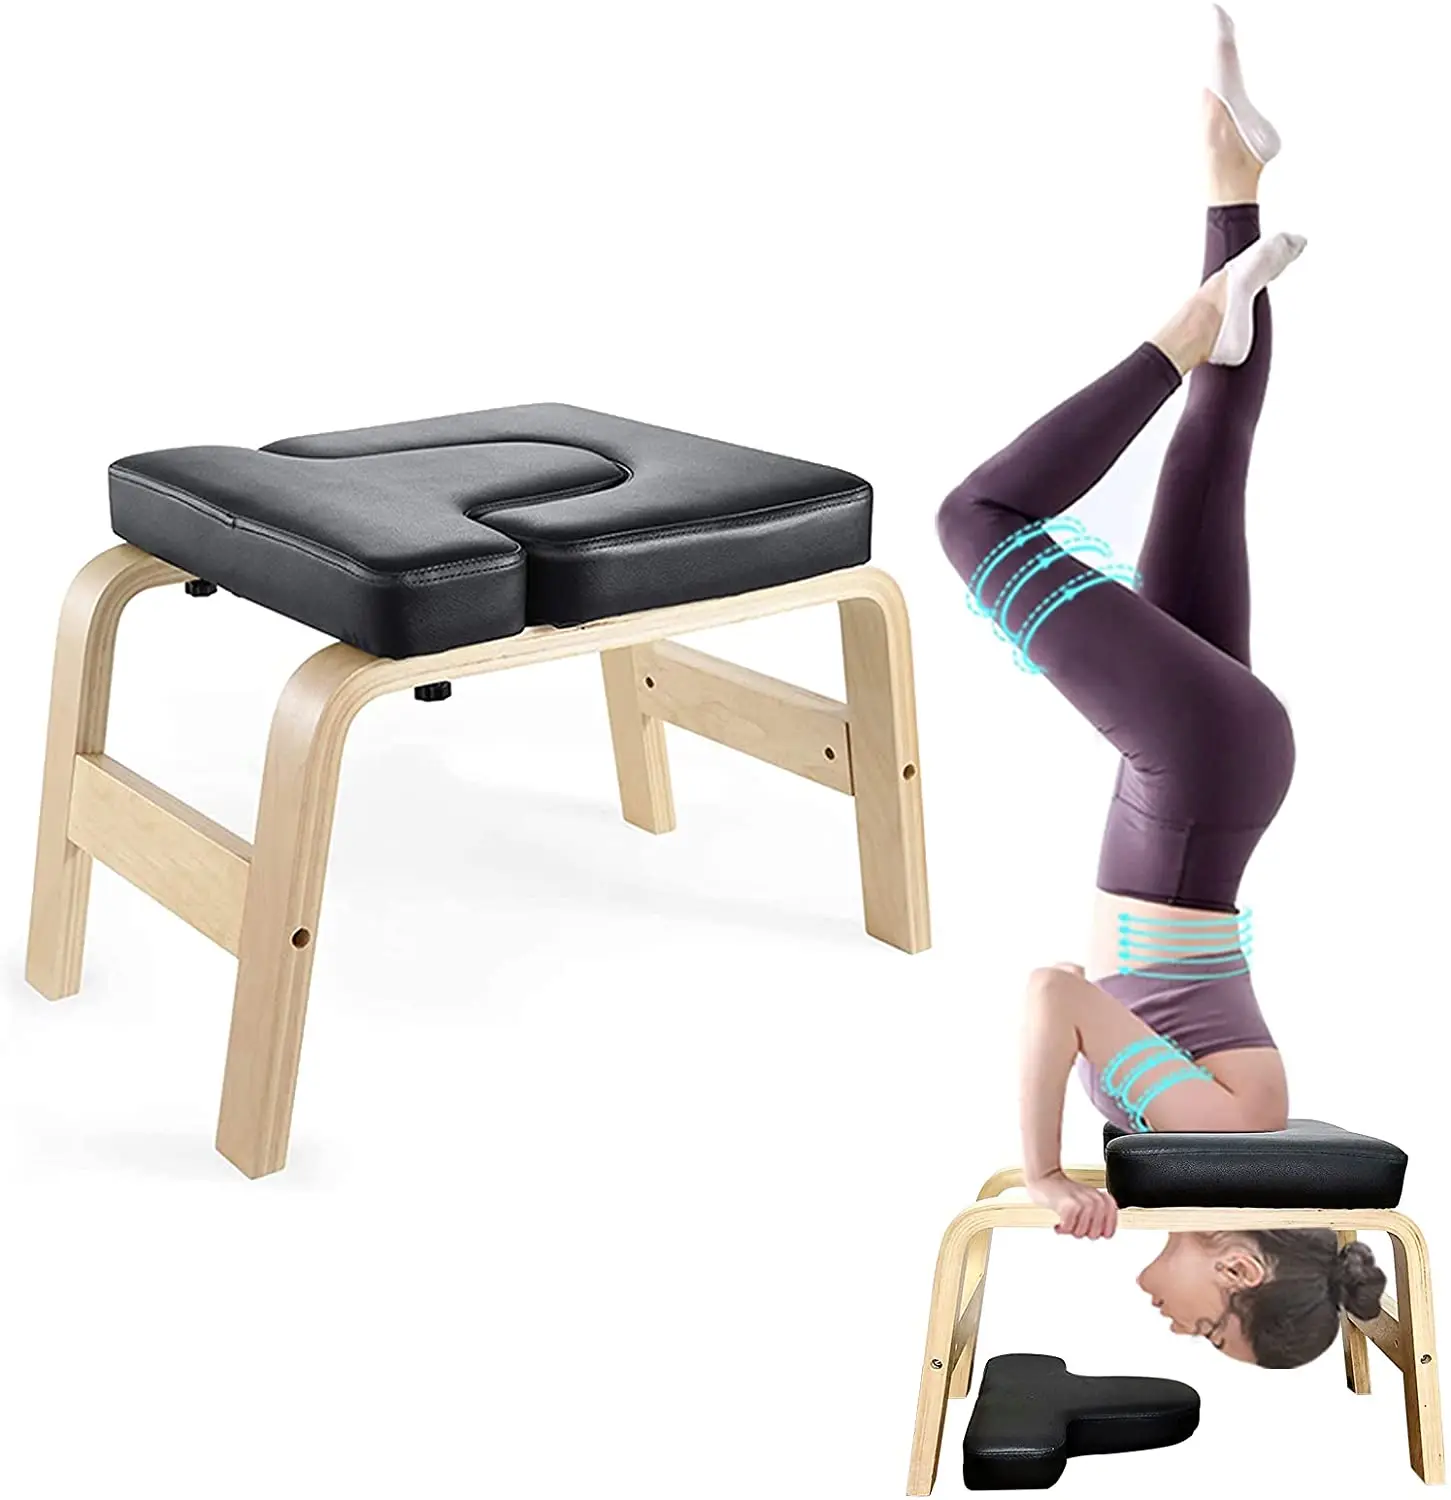 

Multifunctional wooden Yoga Headstand Bench with PU Pads Yoga Inversion Stool for Balance Training Core Strength